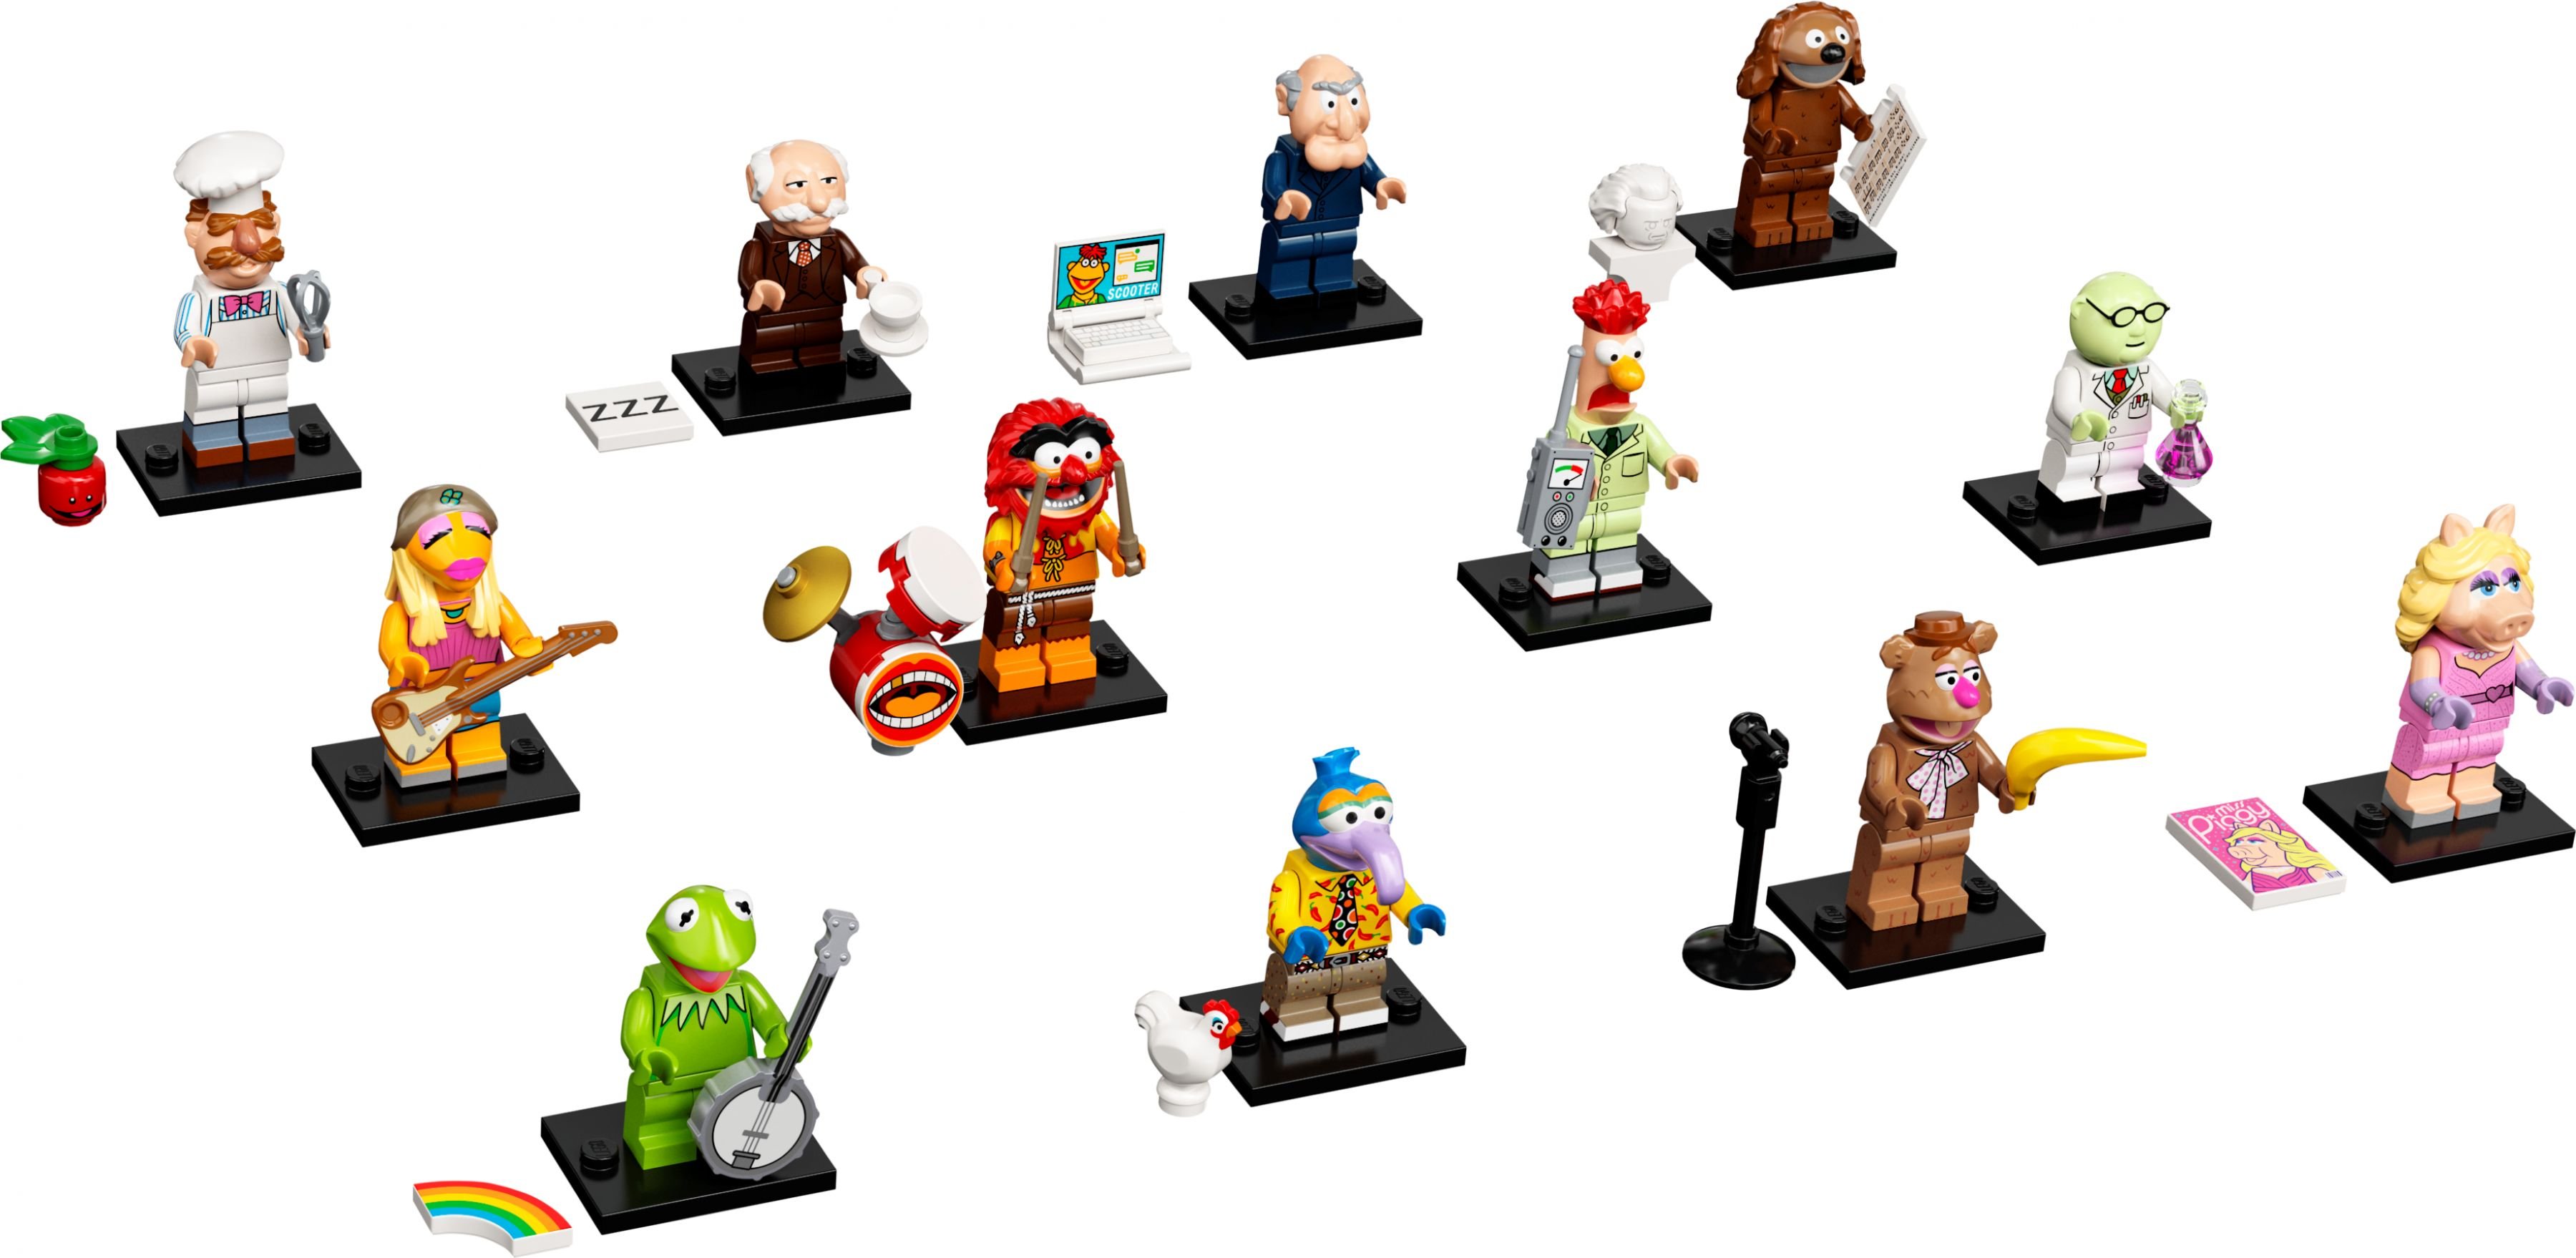 LEGO Collectable Minifigures 71033 Die Muppets LEGO_71033.jpg